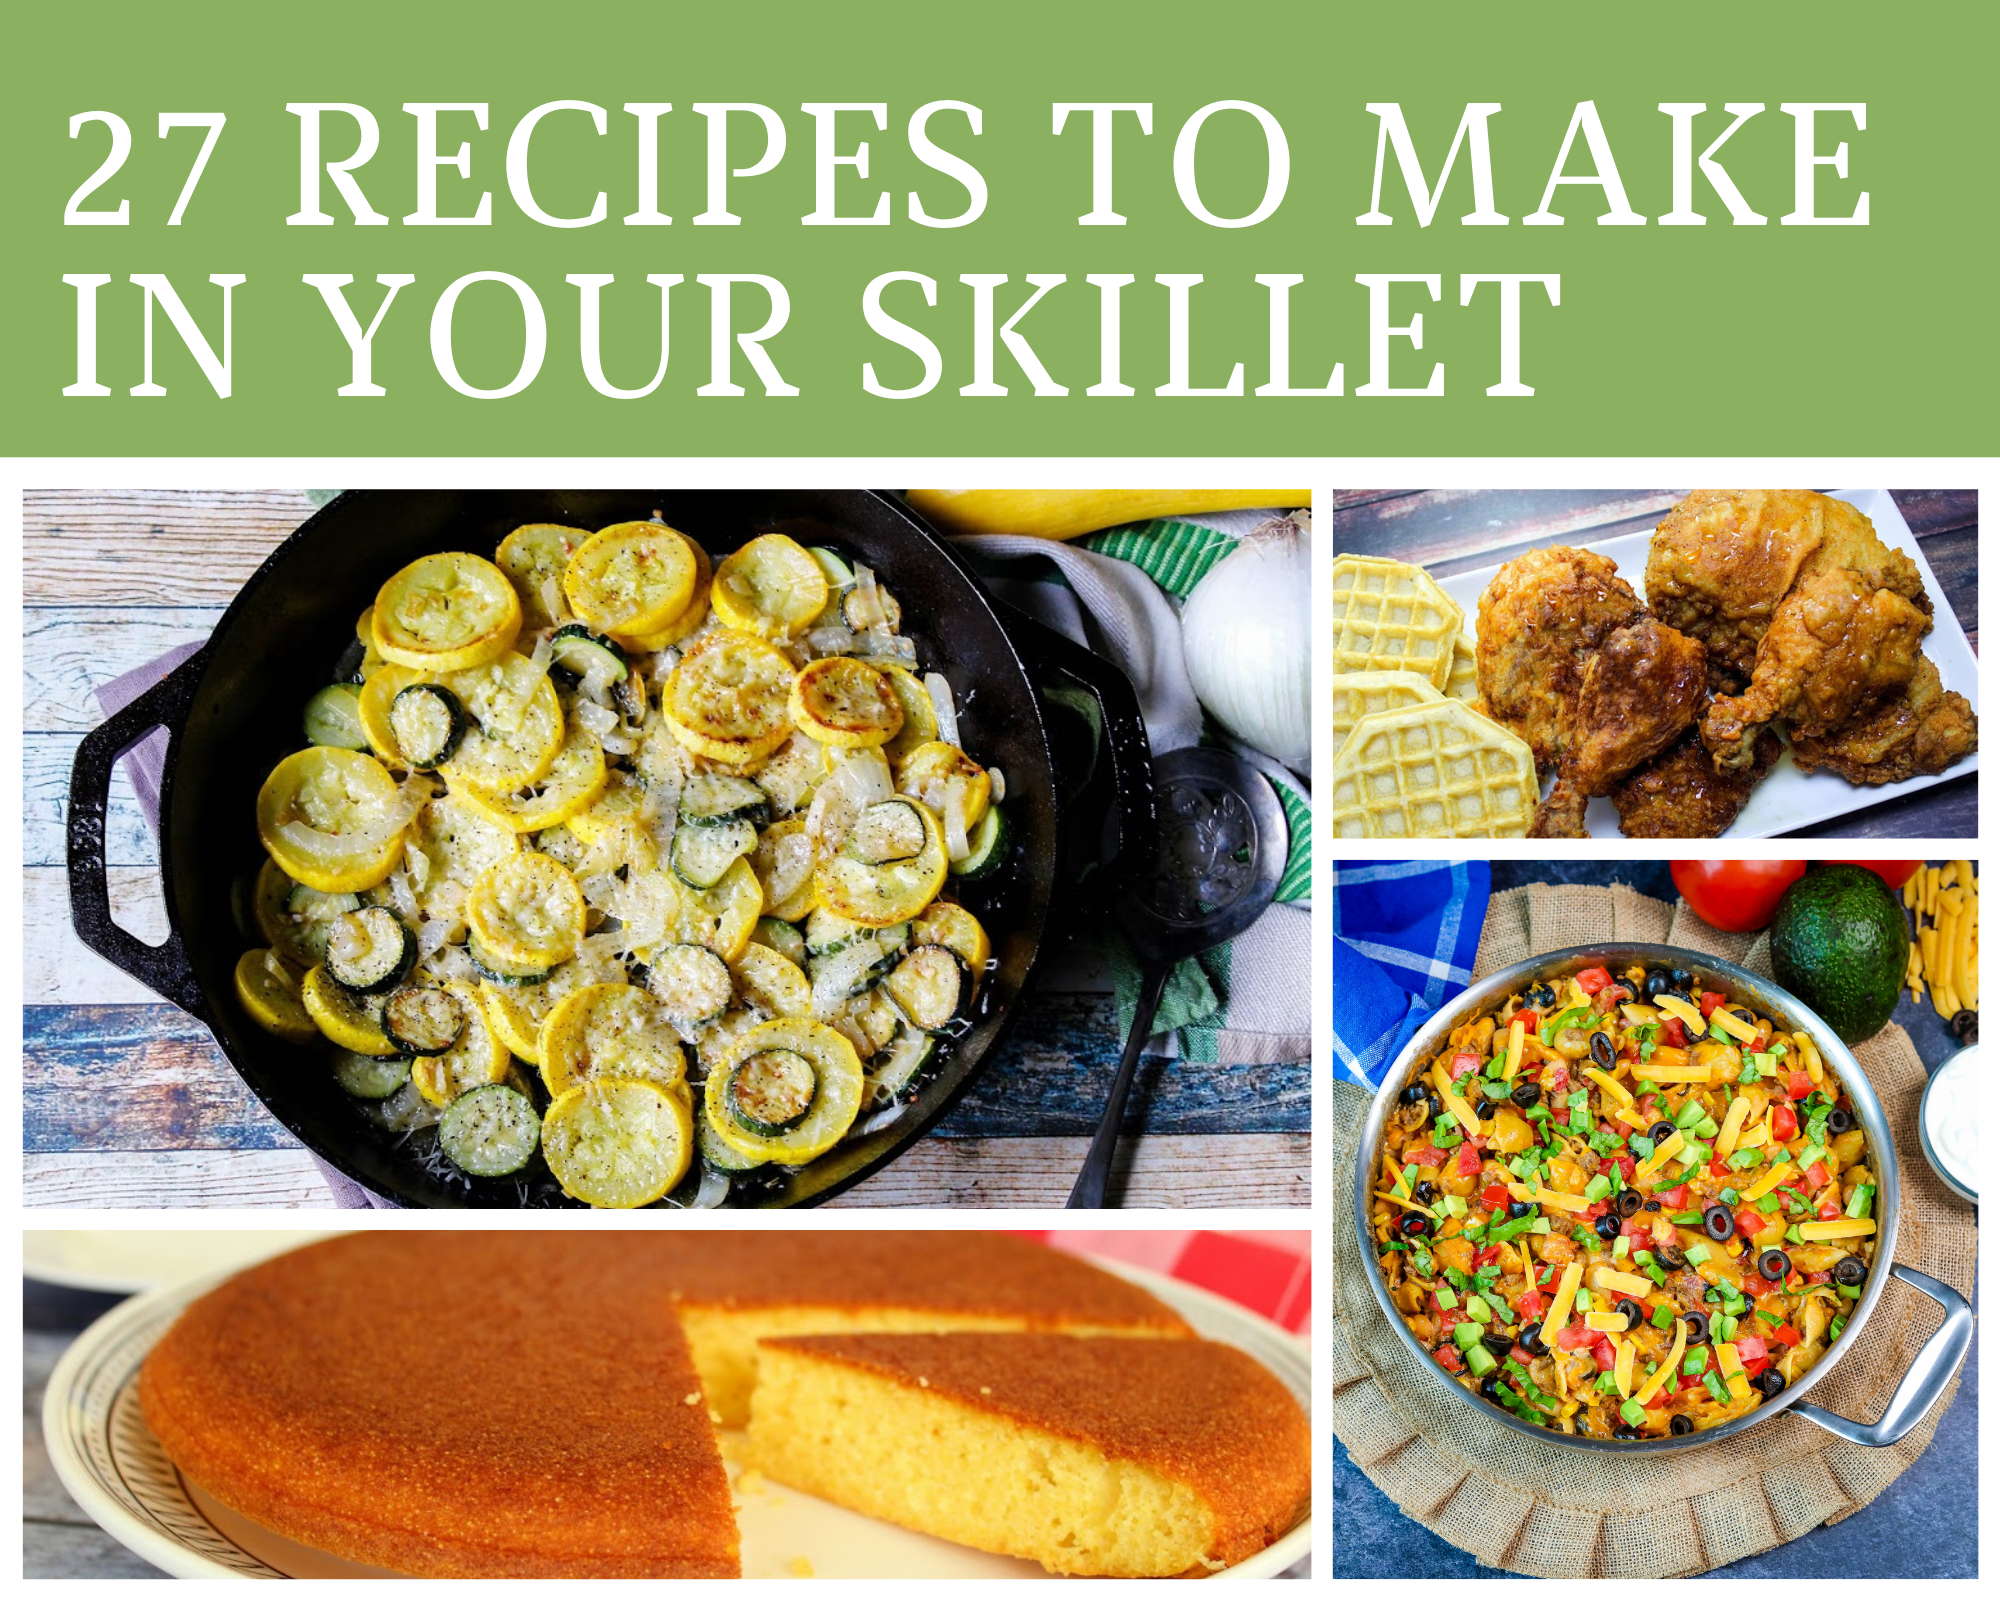 27 Recipes to Make in Your Skillet